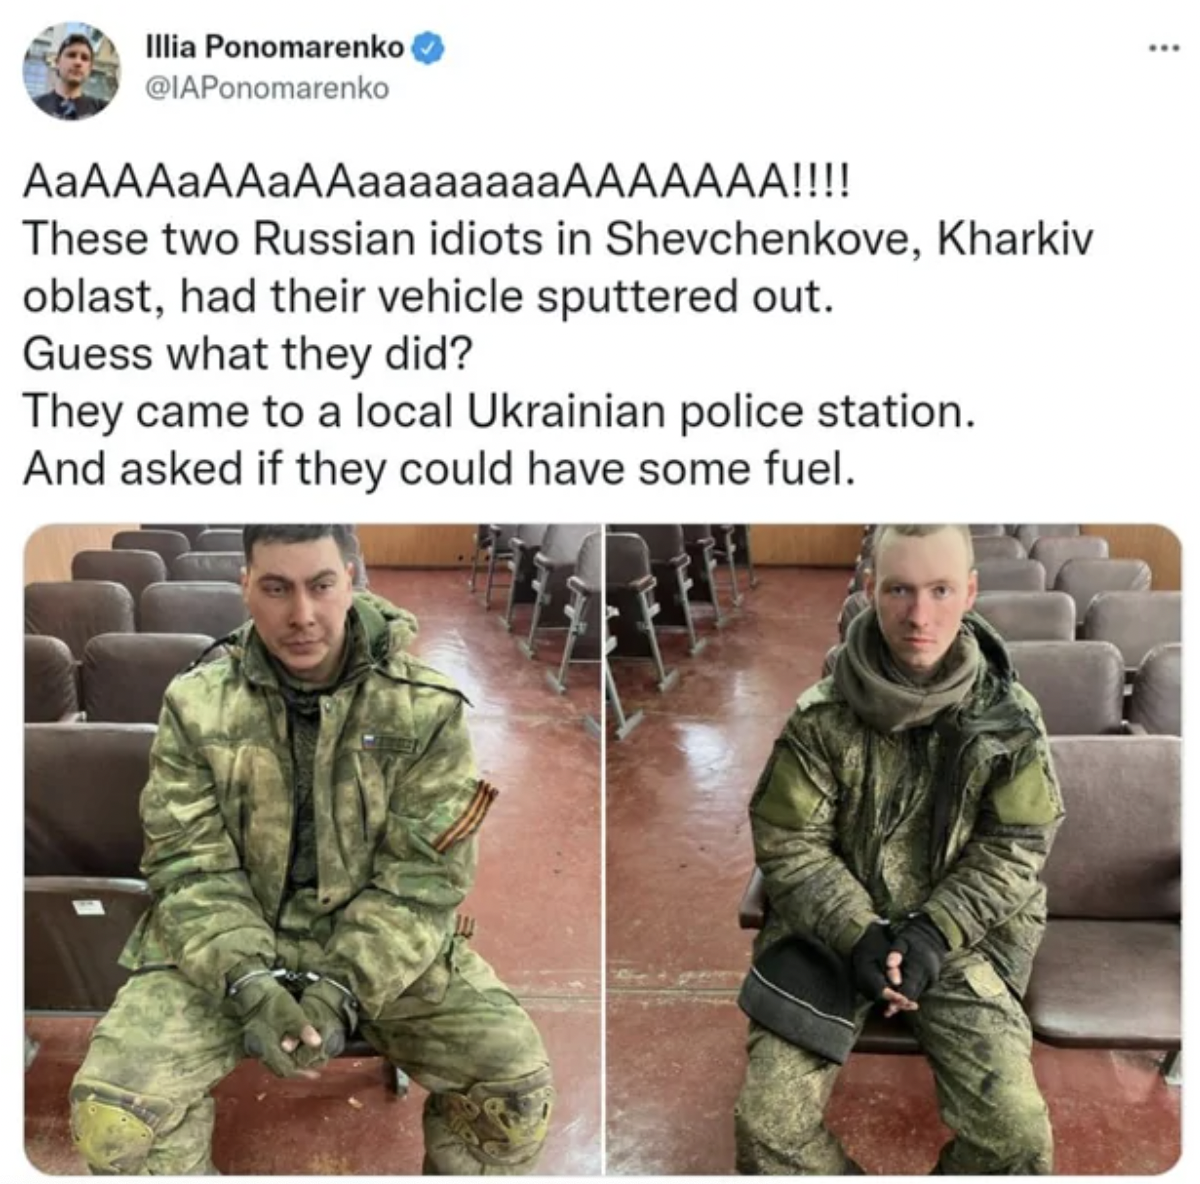 russian soldiers ask for gas - Illia Ponomarenko AaAAAaAAaAAaaaaaaaaAAAAAAA!!!! These two Russian idiots in Shevchenkove, Kharkiv oblast, had their vehicle sputtered out. Guess what they did? They came to a local Ukrainian police station. And asked if the